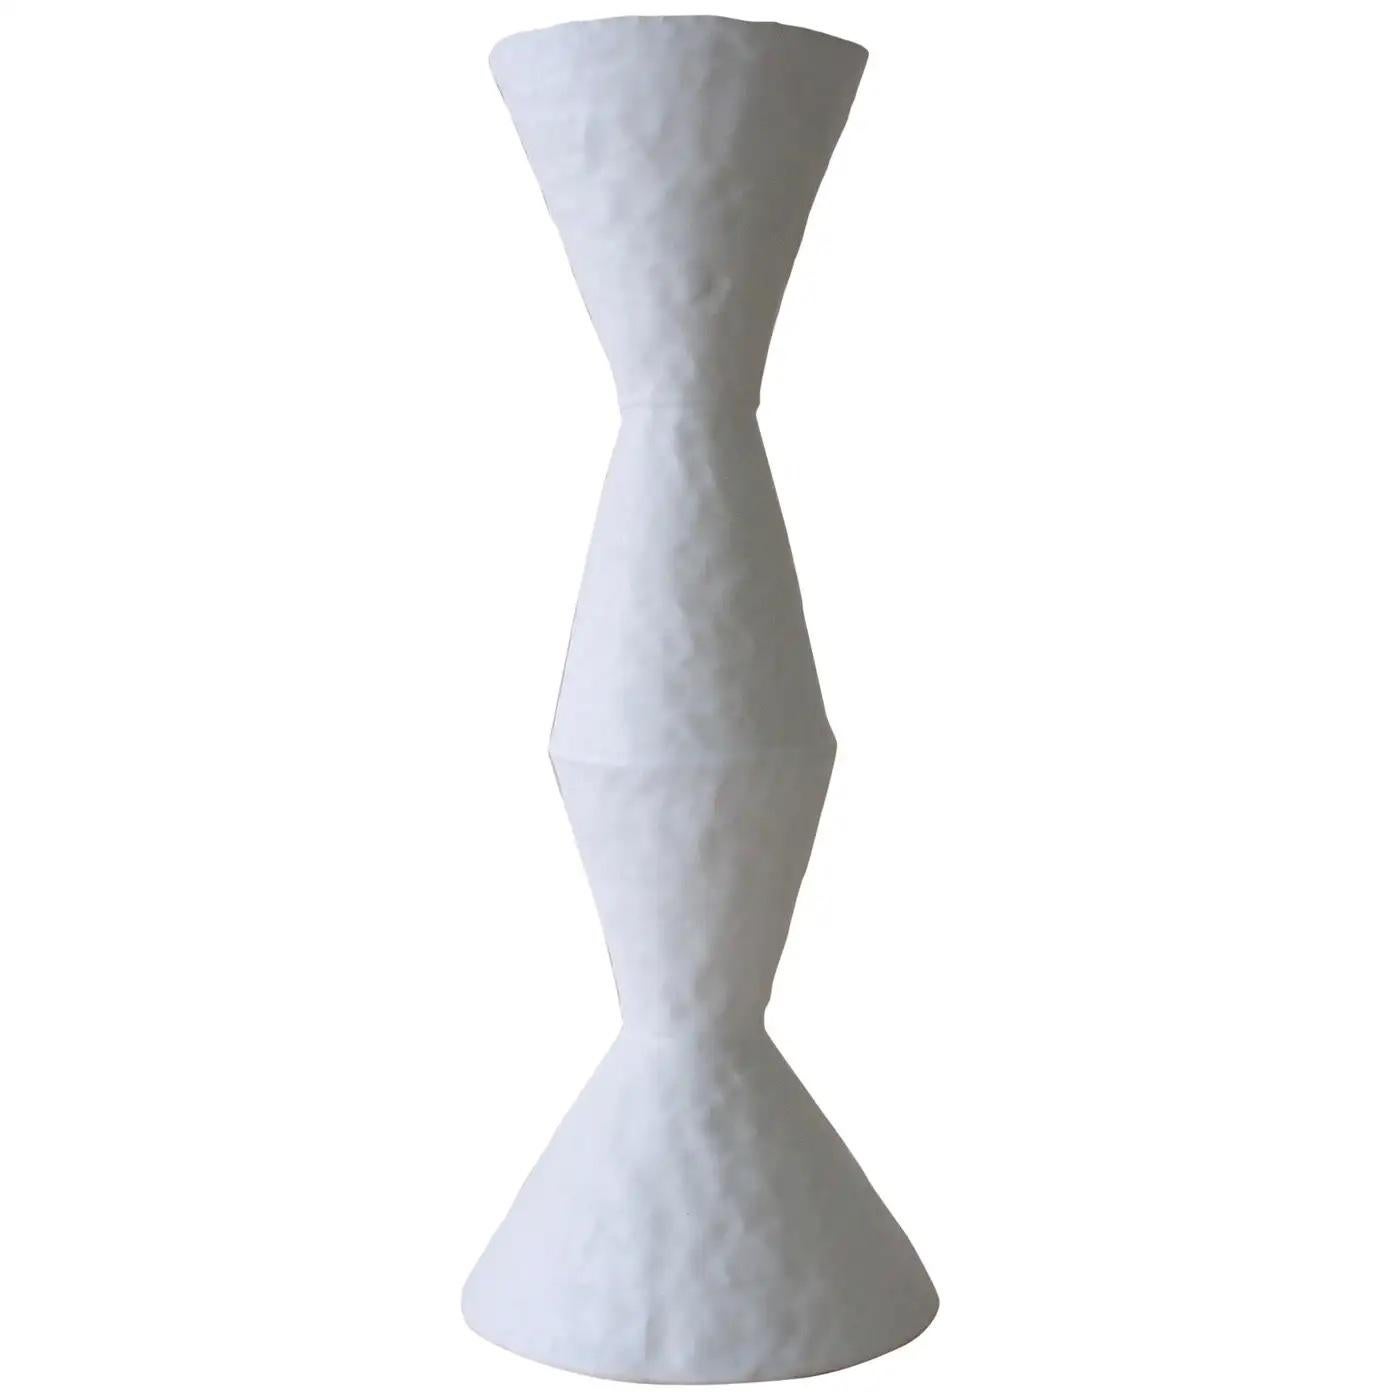 Contemporary American ceramic artist Giselle Hicks' glazed white stoneware vase is part of her Vessel Series. Each form is built by hand using a coil and pinch technique. They are formal explorations in shape, volume, color and composition. The